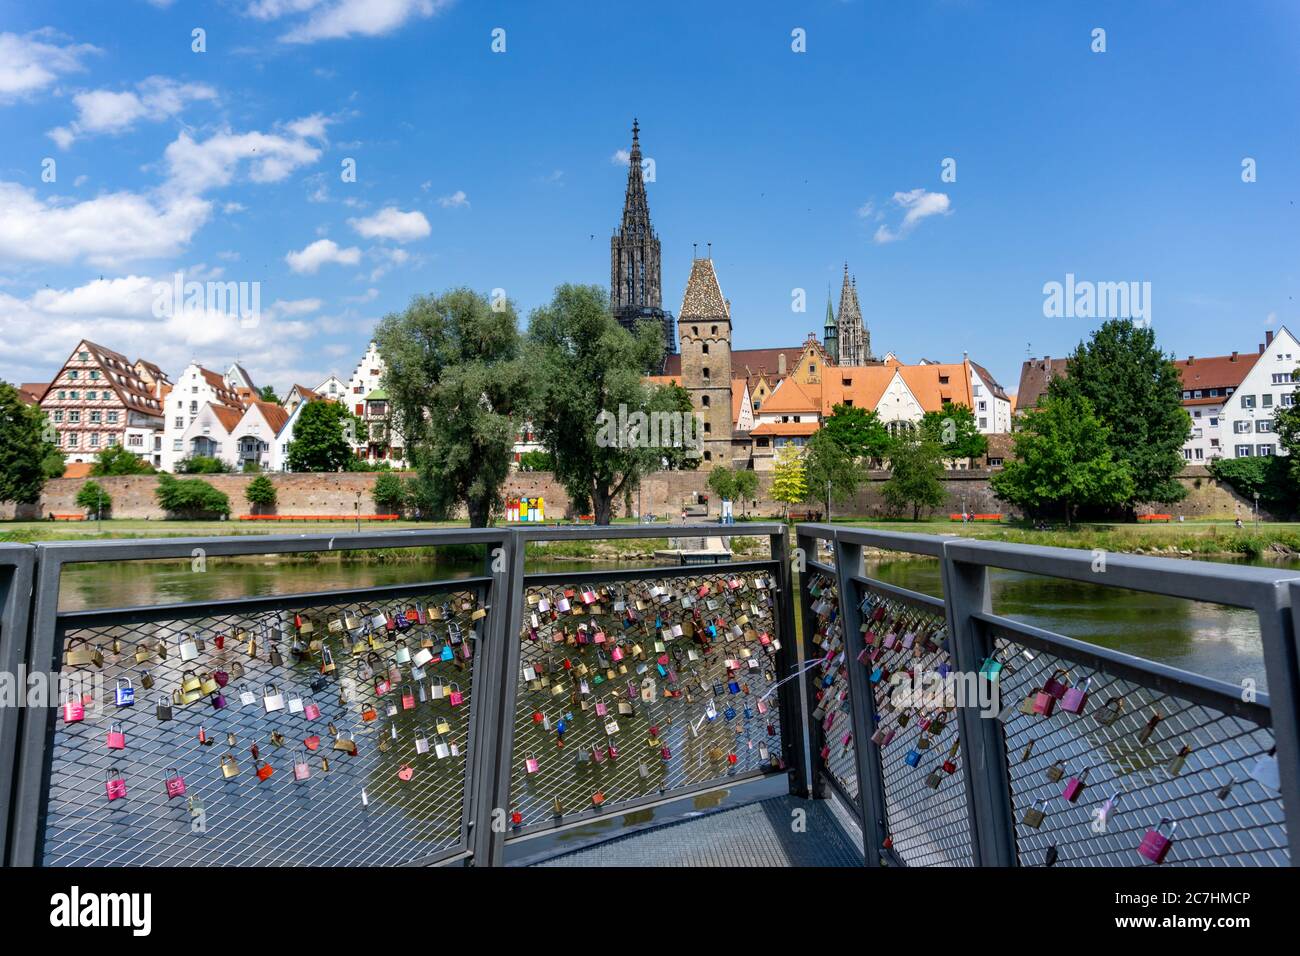 Ulm, BW / Germany - 14 July 2020: view of the city of Ulm on the Danube River with love locks in the foreground Stock Photo